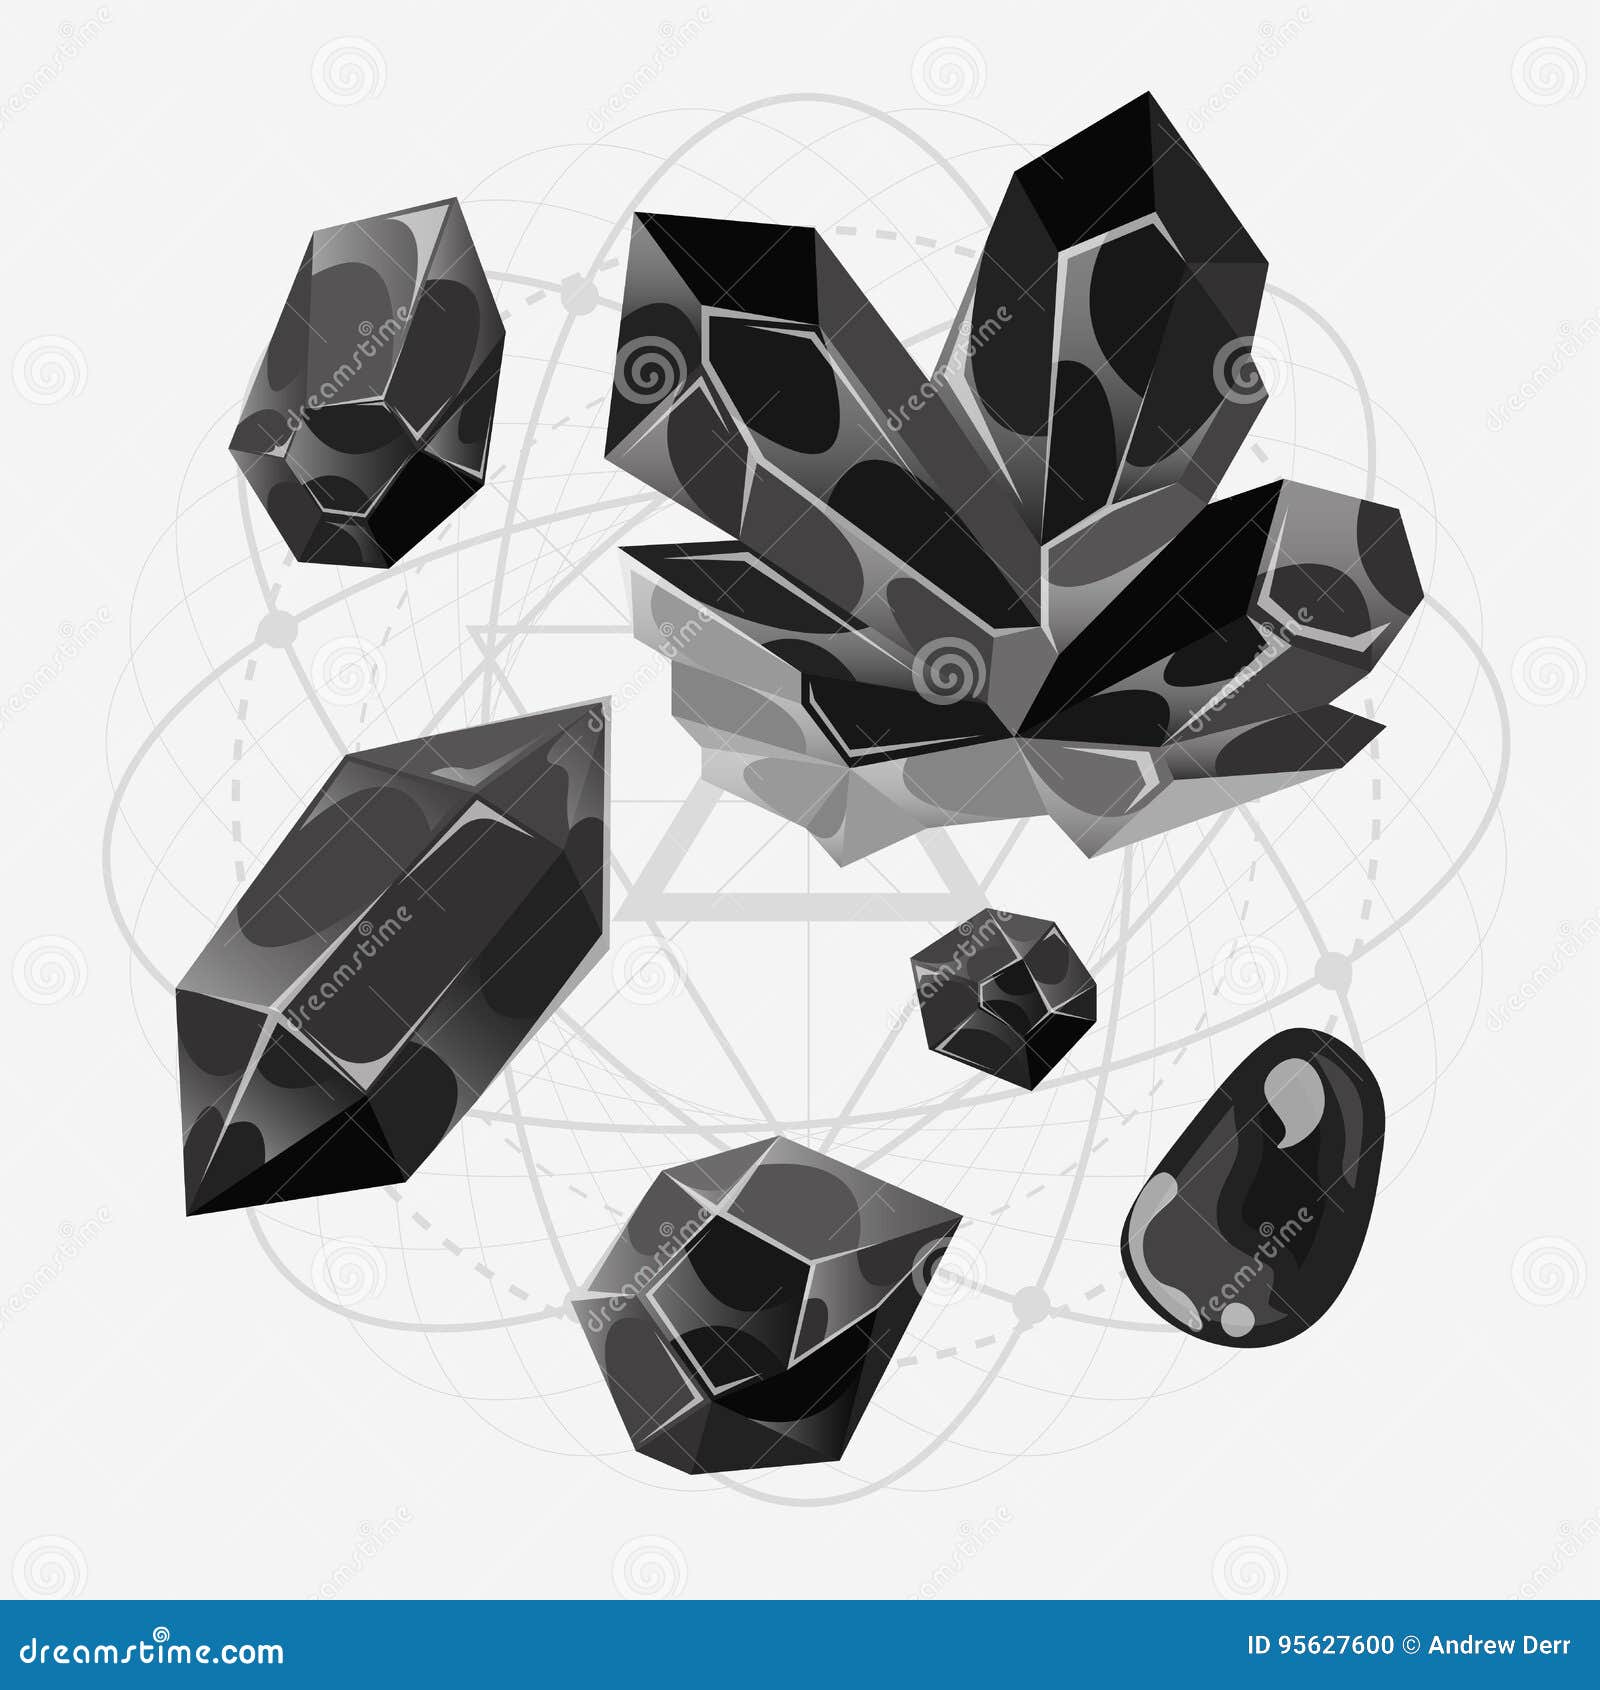 Illustration Of A Set Of Black Gems Stones, Minerals Icons For Web